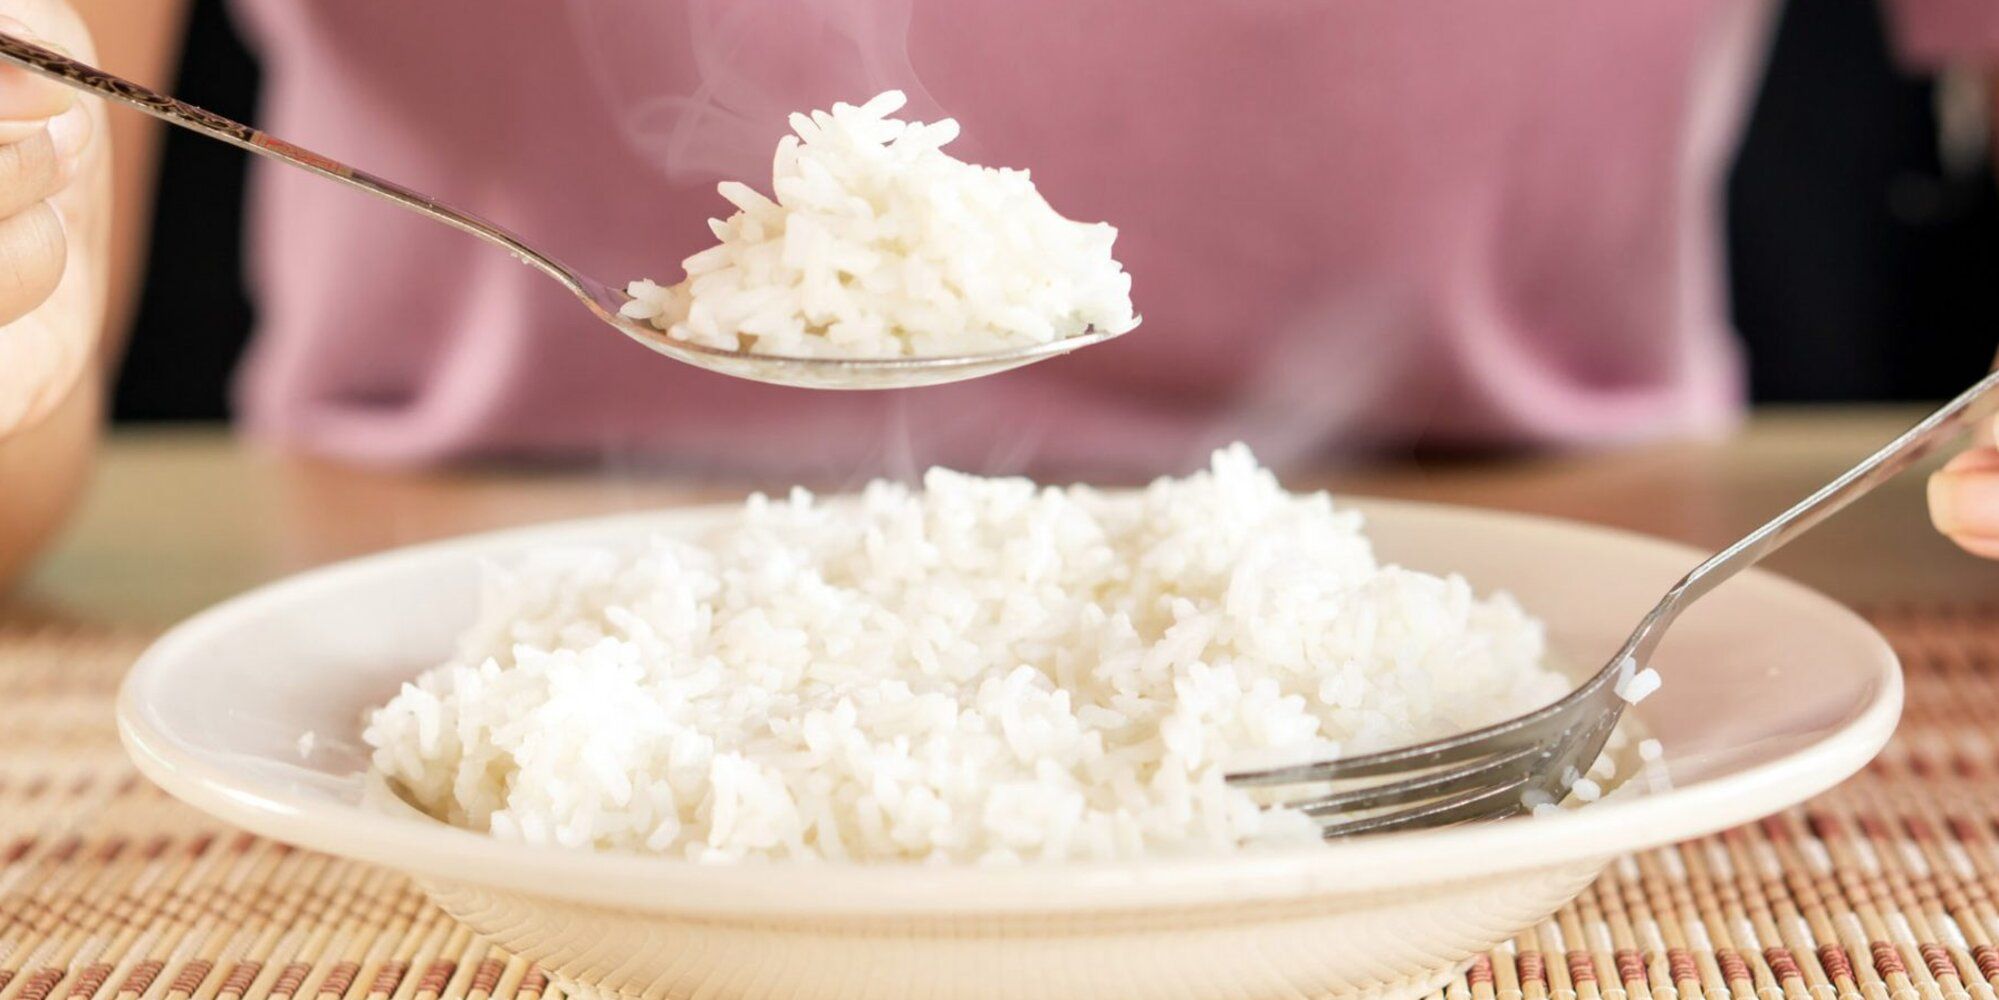 What to Eat With White Rice